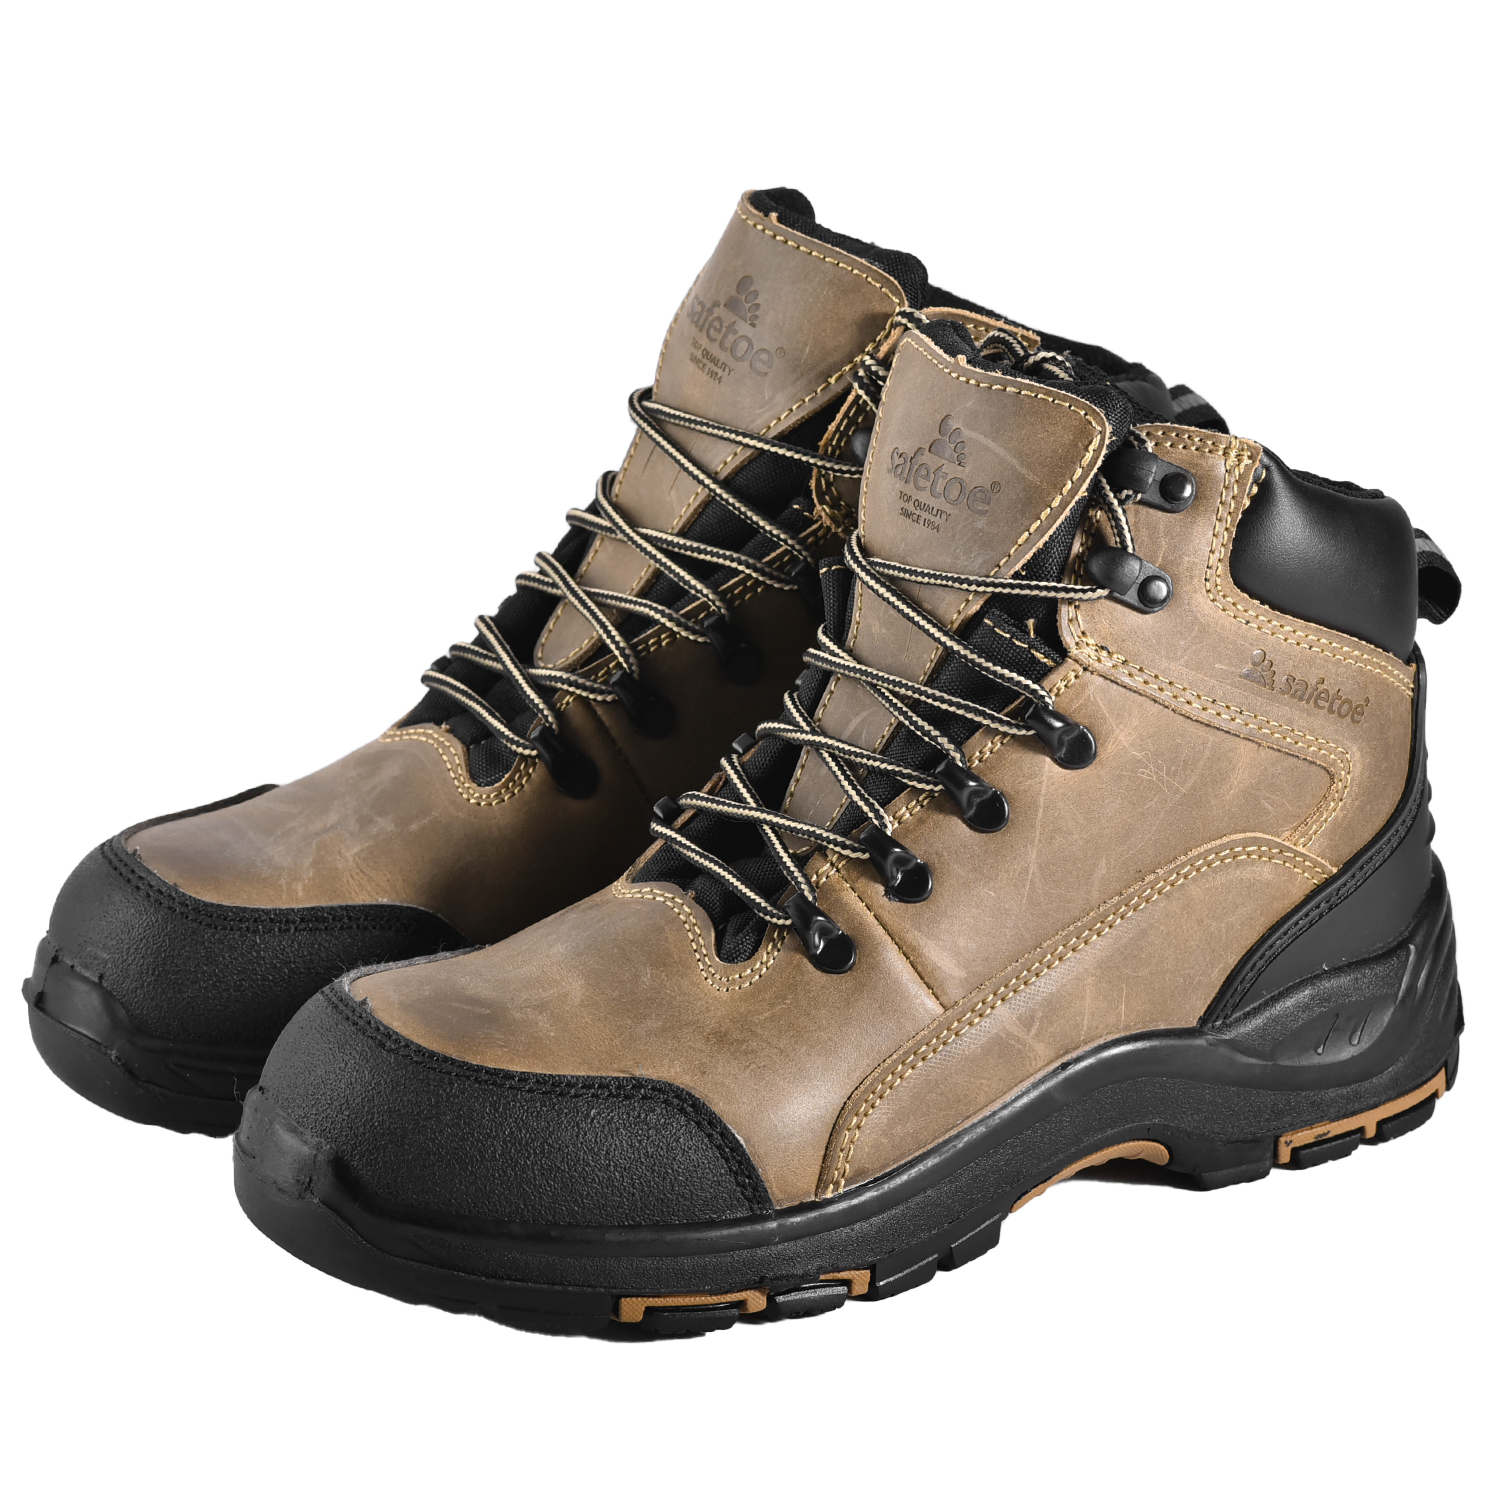 Acid Resistant & Chemical Proof Safety Boots M-8510